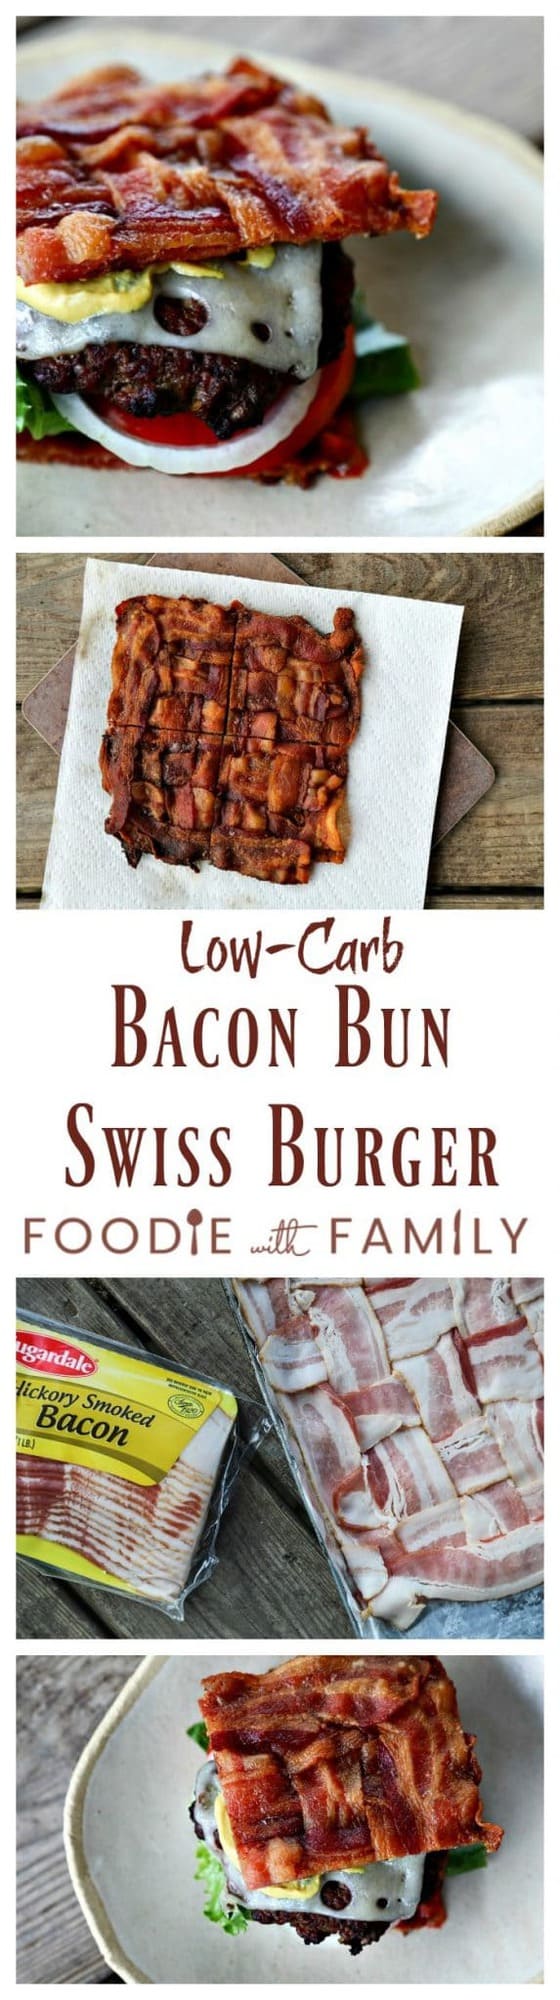 This Low-Carb Bacon Bun Swiss Burger is still seriously indulgent with a basket-weave bacon bun, melted Swiss cheese, a ground chuck burger, a hint of Dijon mustard, leaf lettuce, fresh tomato, and sweet onion. Hang onto that last bit of summer!